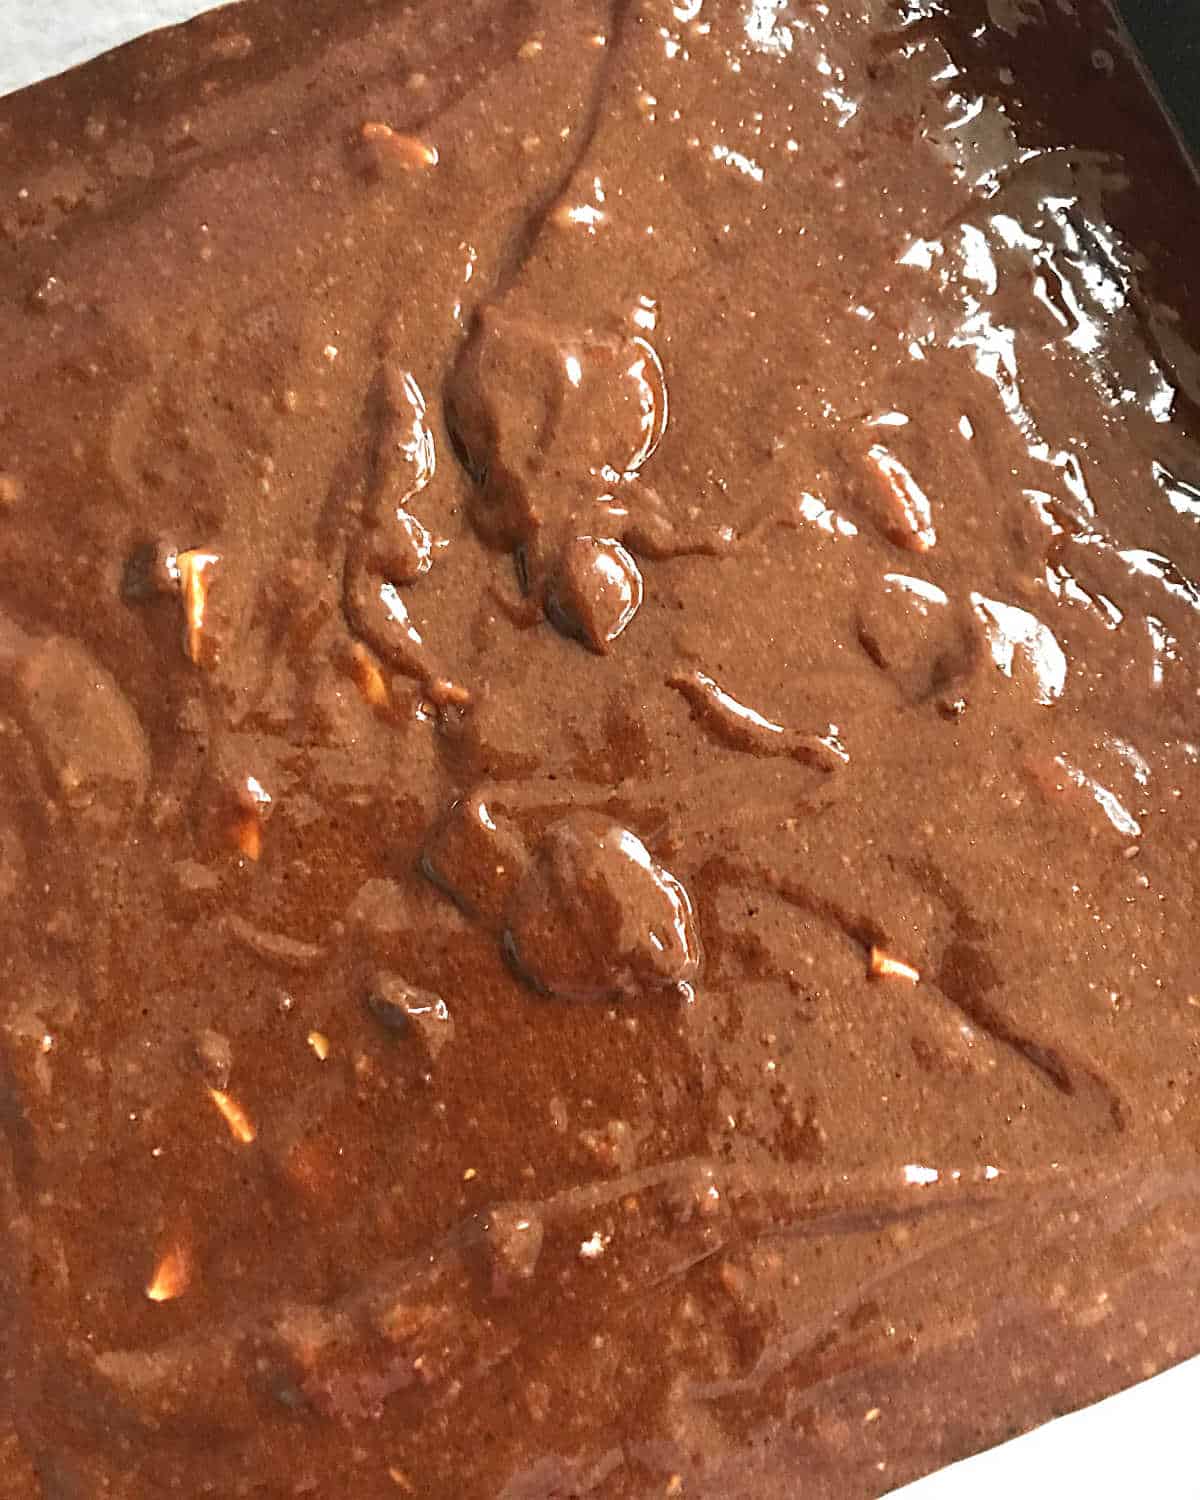 Brownie chocolate batter before baking. Close up image.